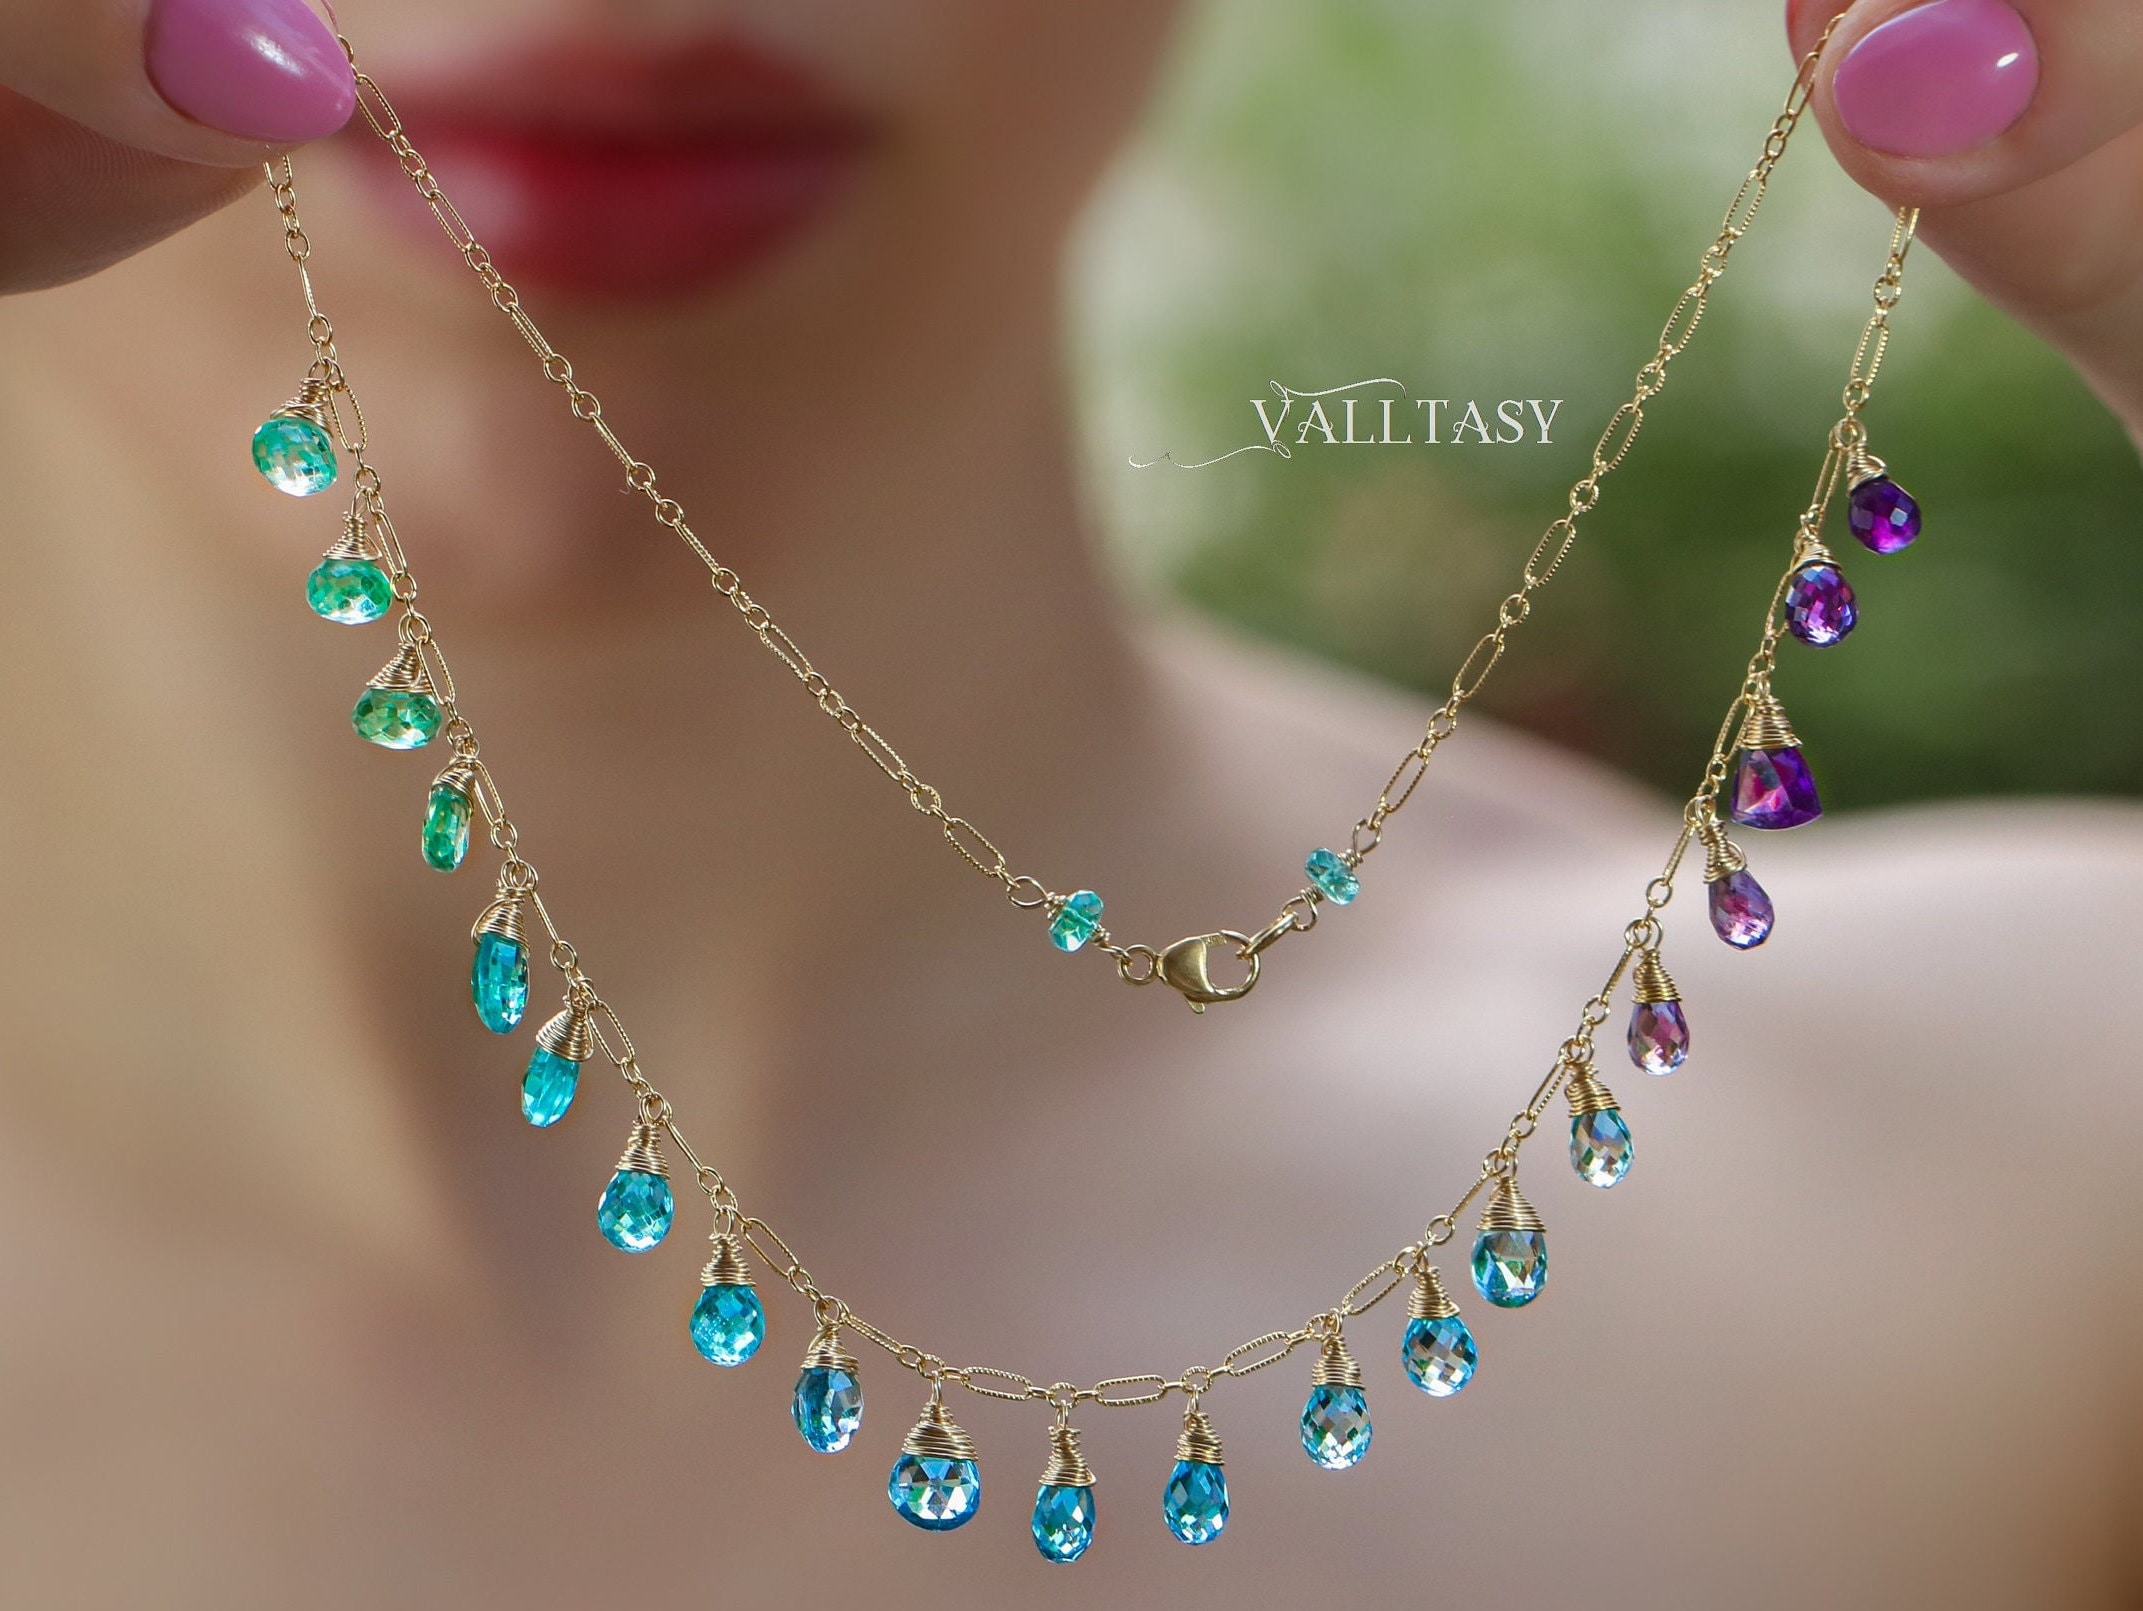 Wall of Heaven Gemstones Necklace, Foundation Stones